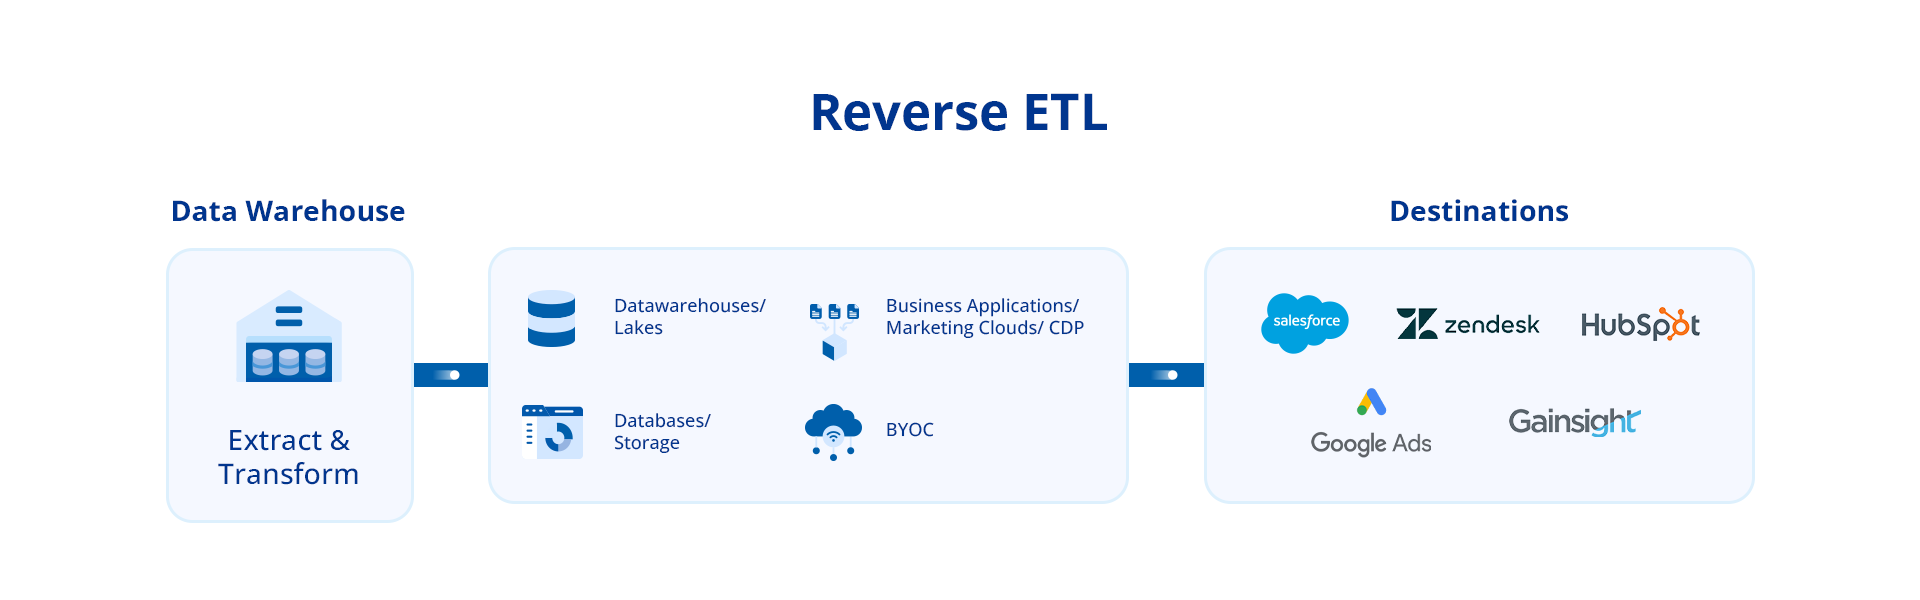 A graphic depicting the Reverse ETL process